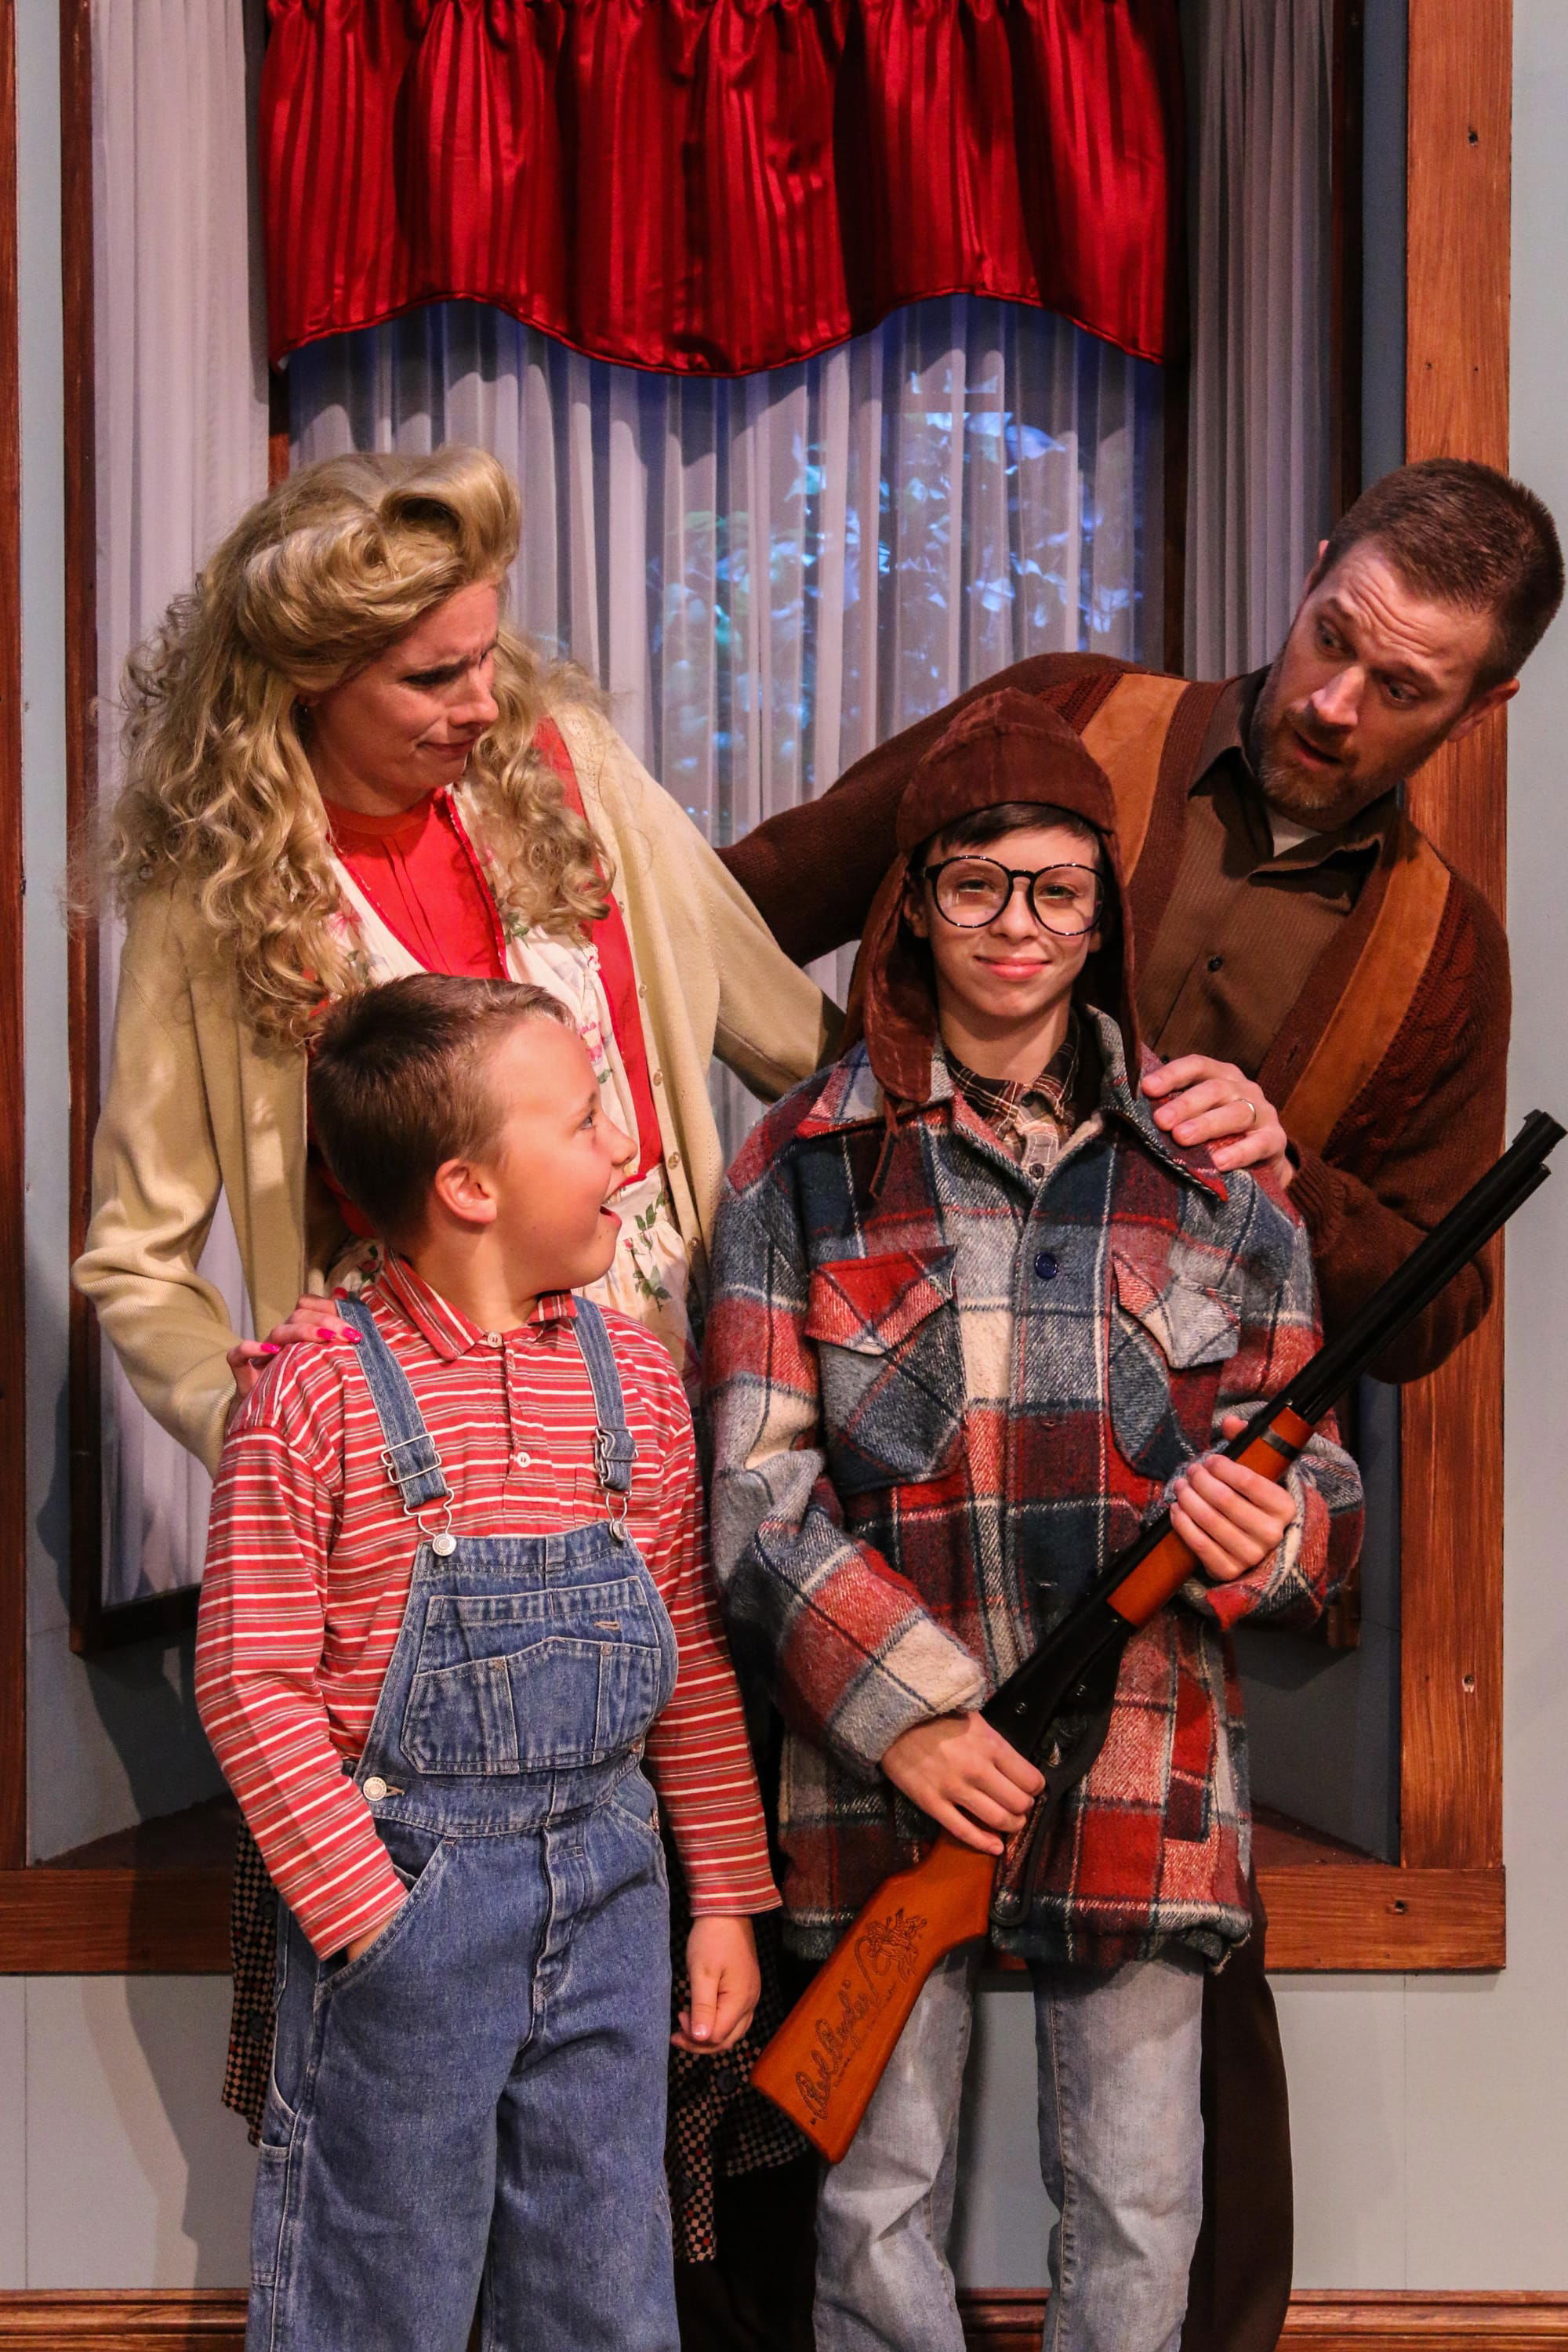 Theatre at the Mount seeks to lighten the holiday spirit with “A Christmas Story”